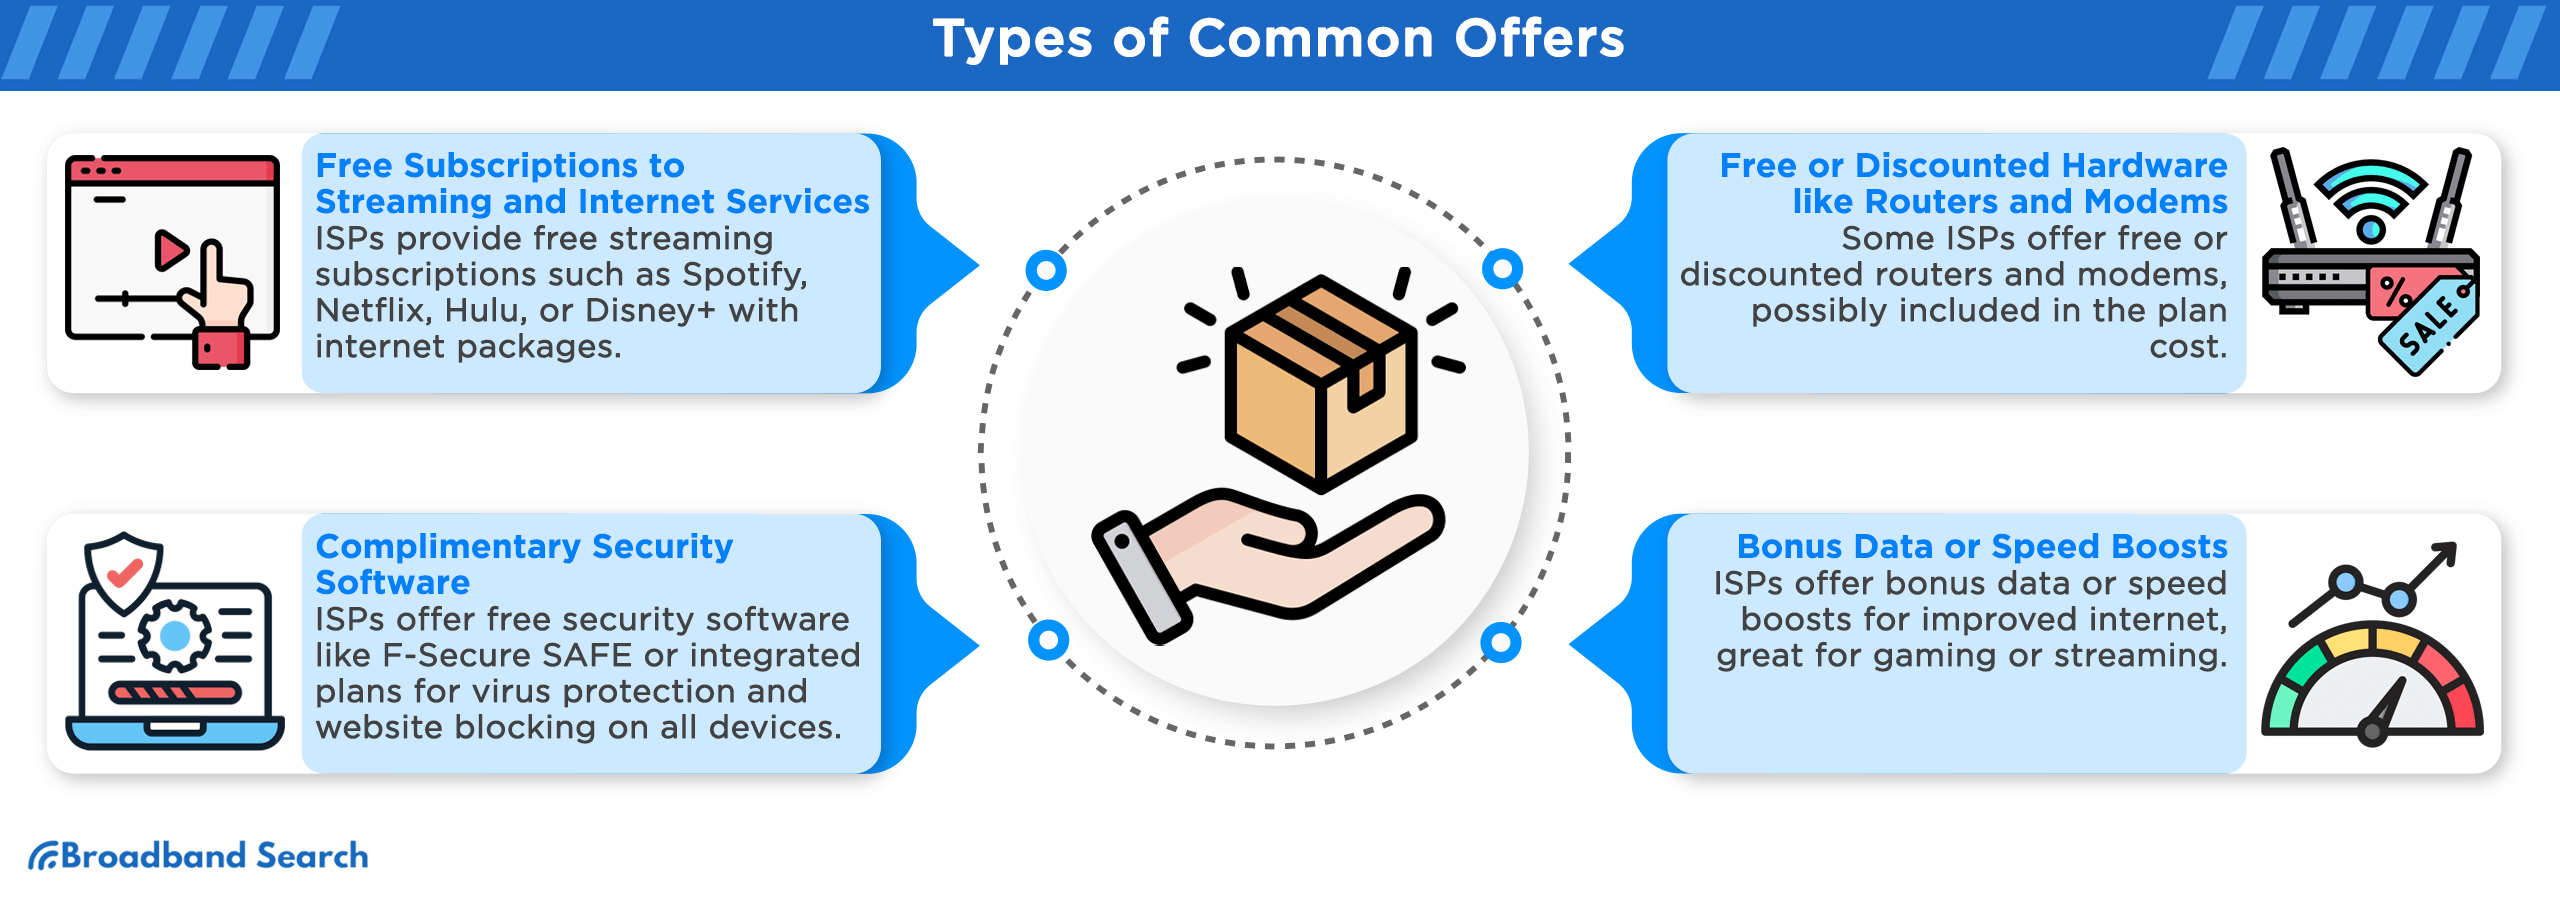 Types of Common Offers